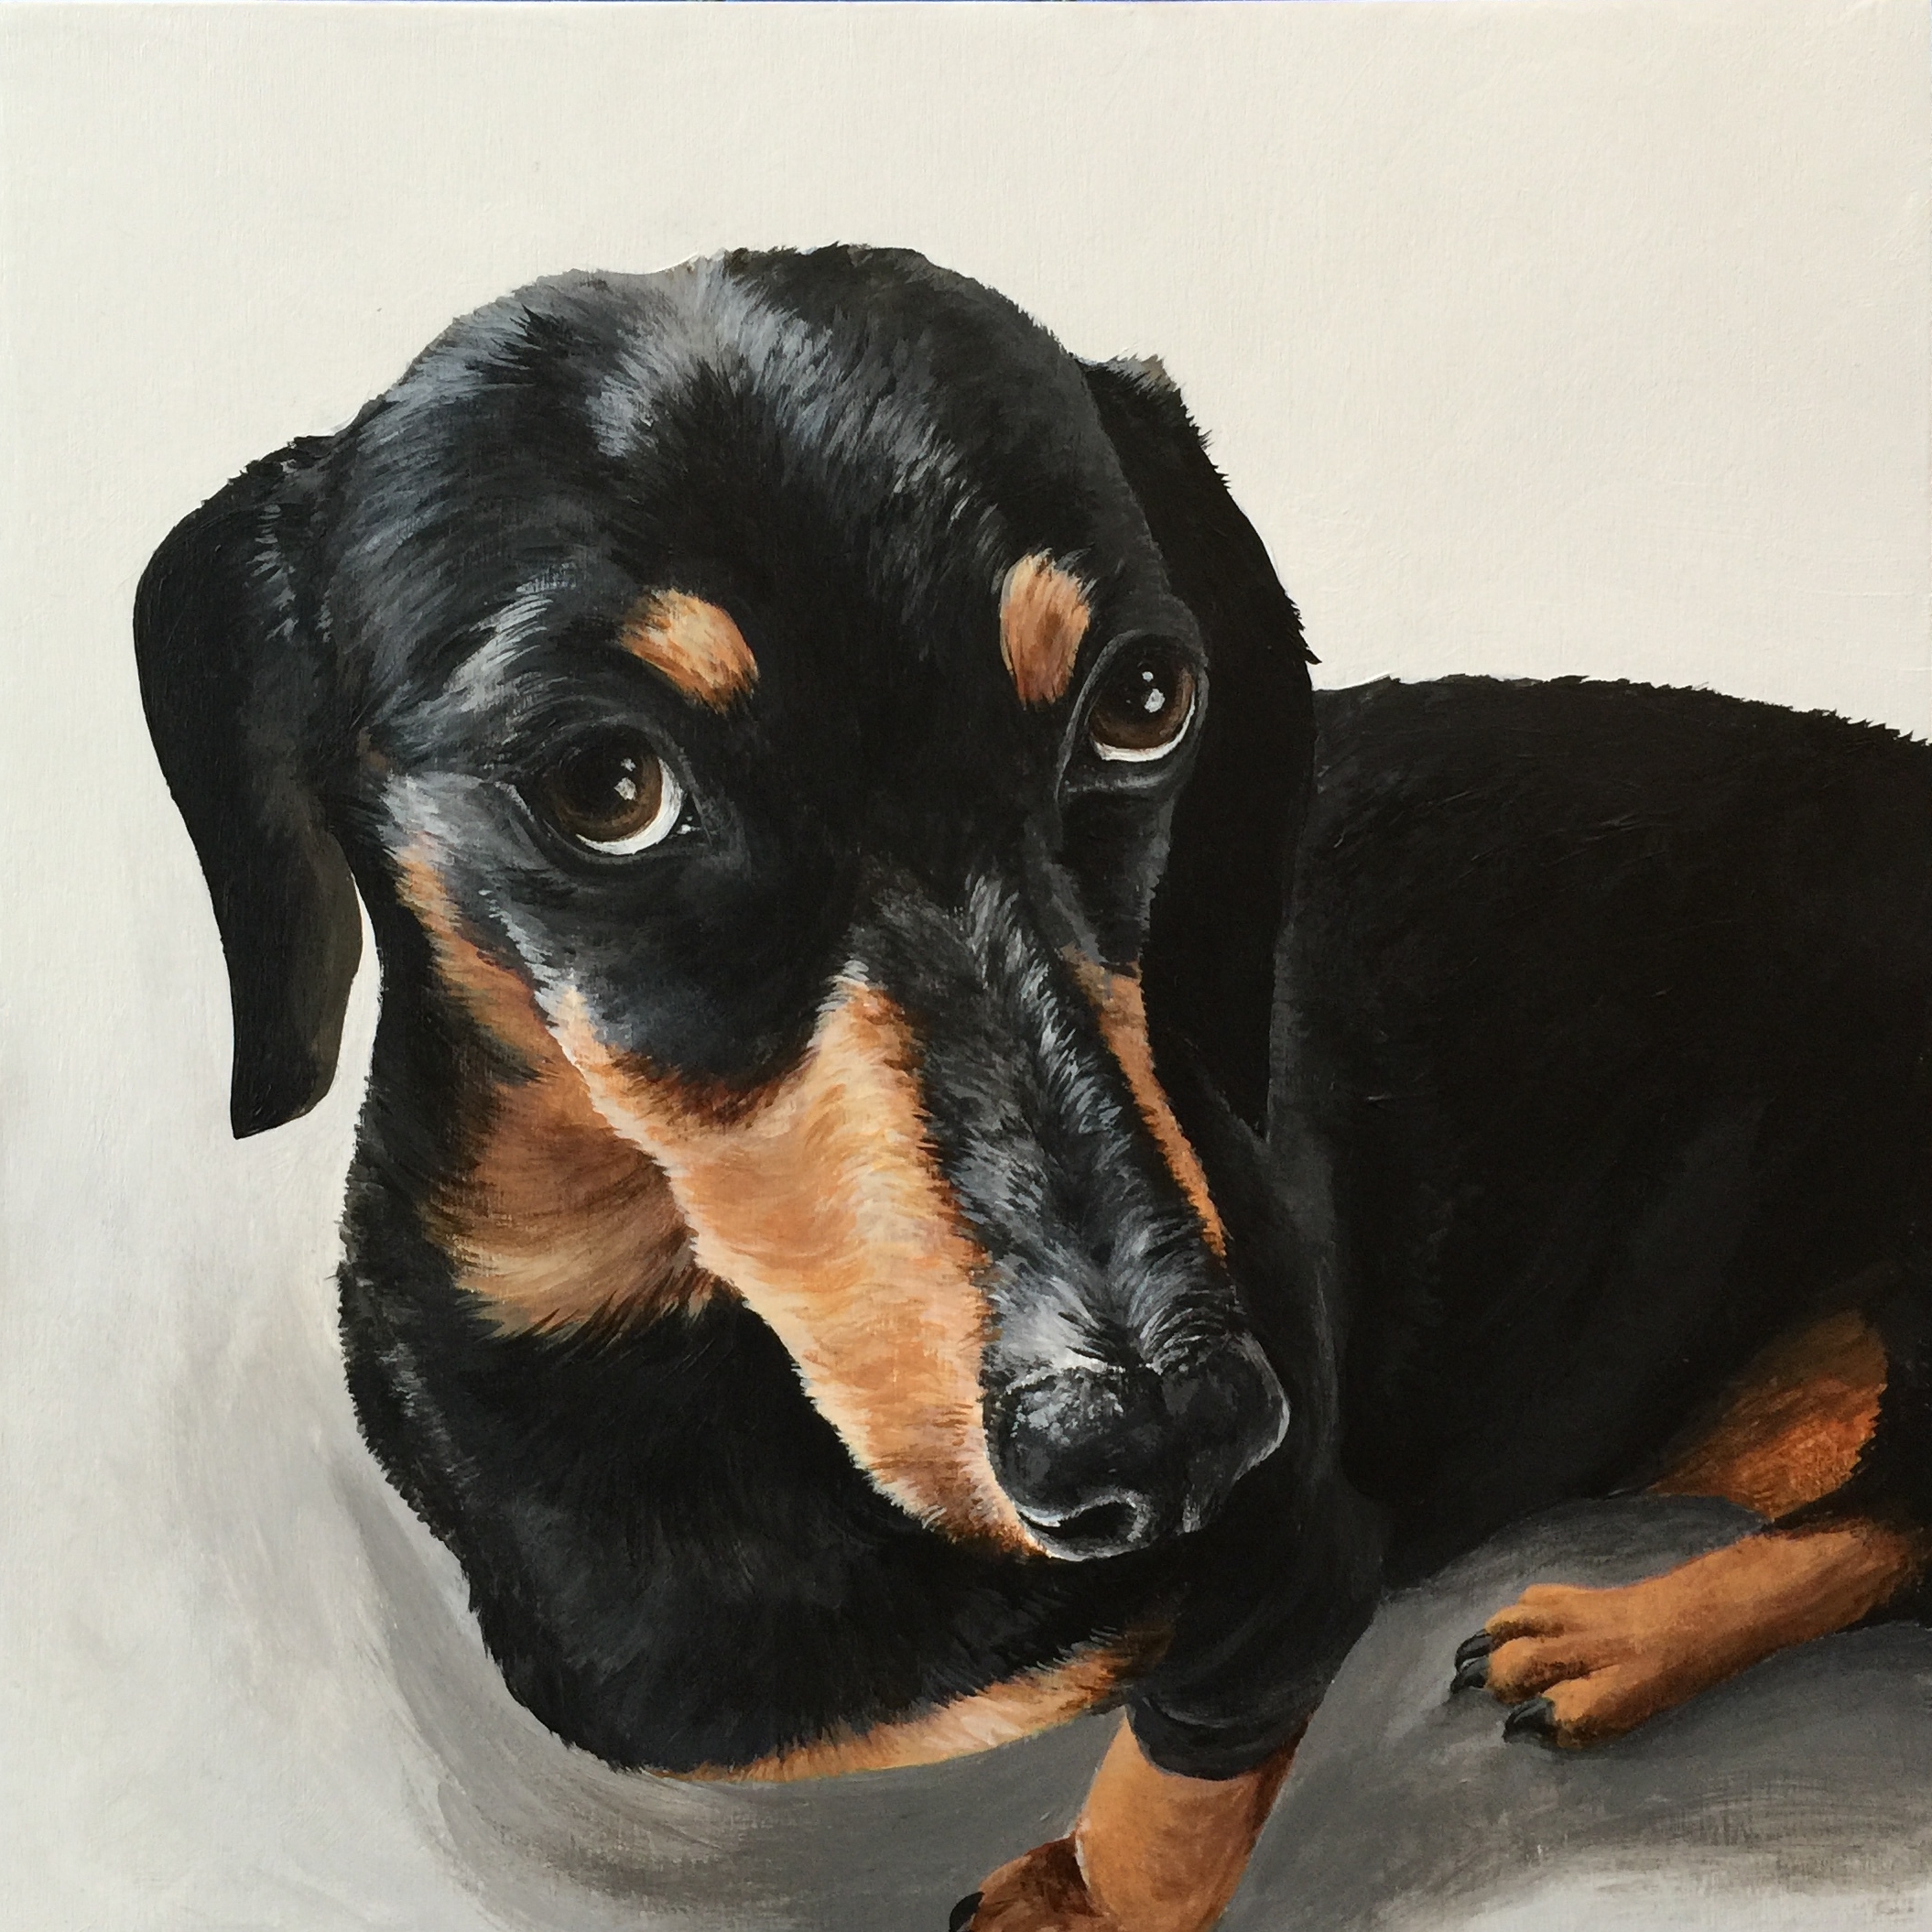  Benny the weiner - commissioned by Ryan and Taina&nbsp; 